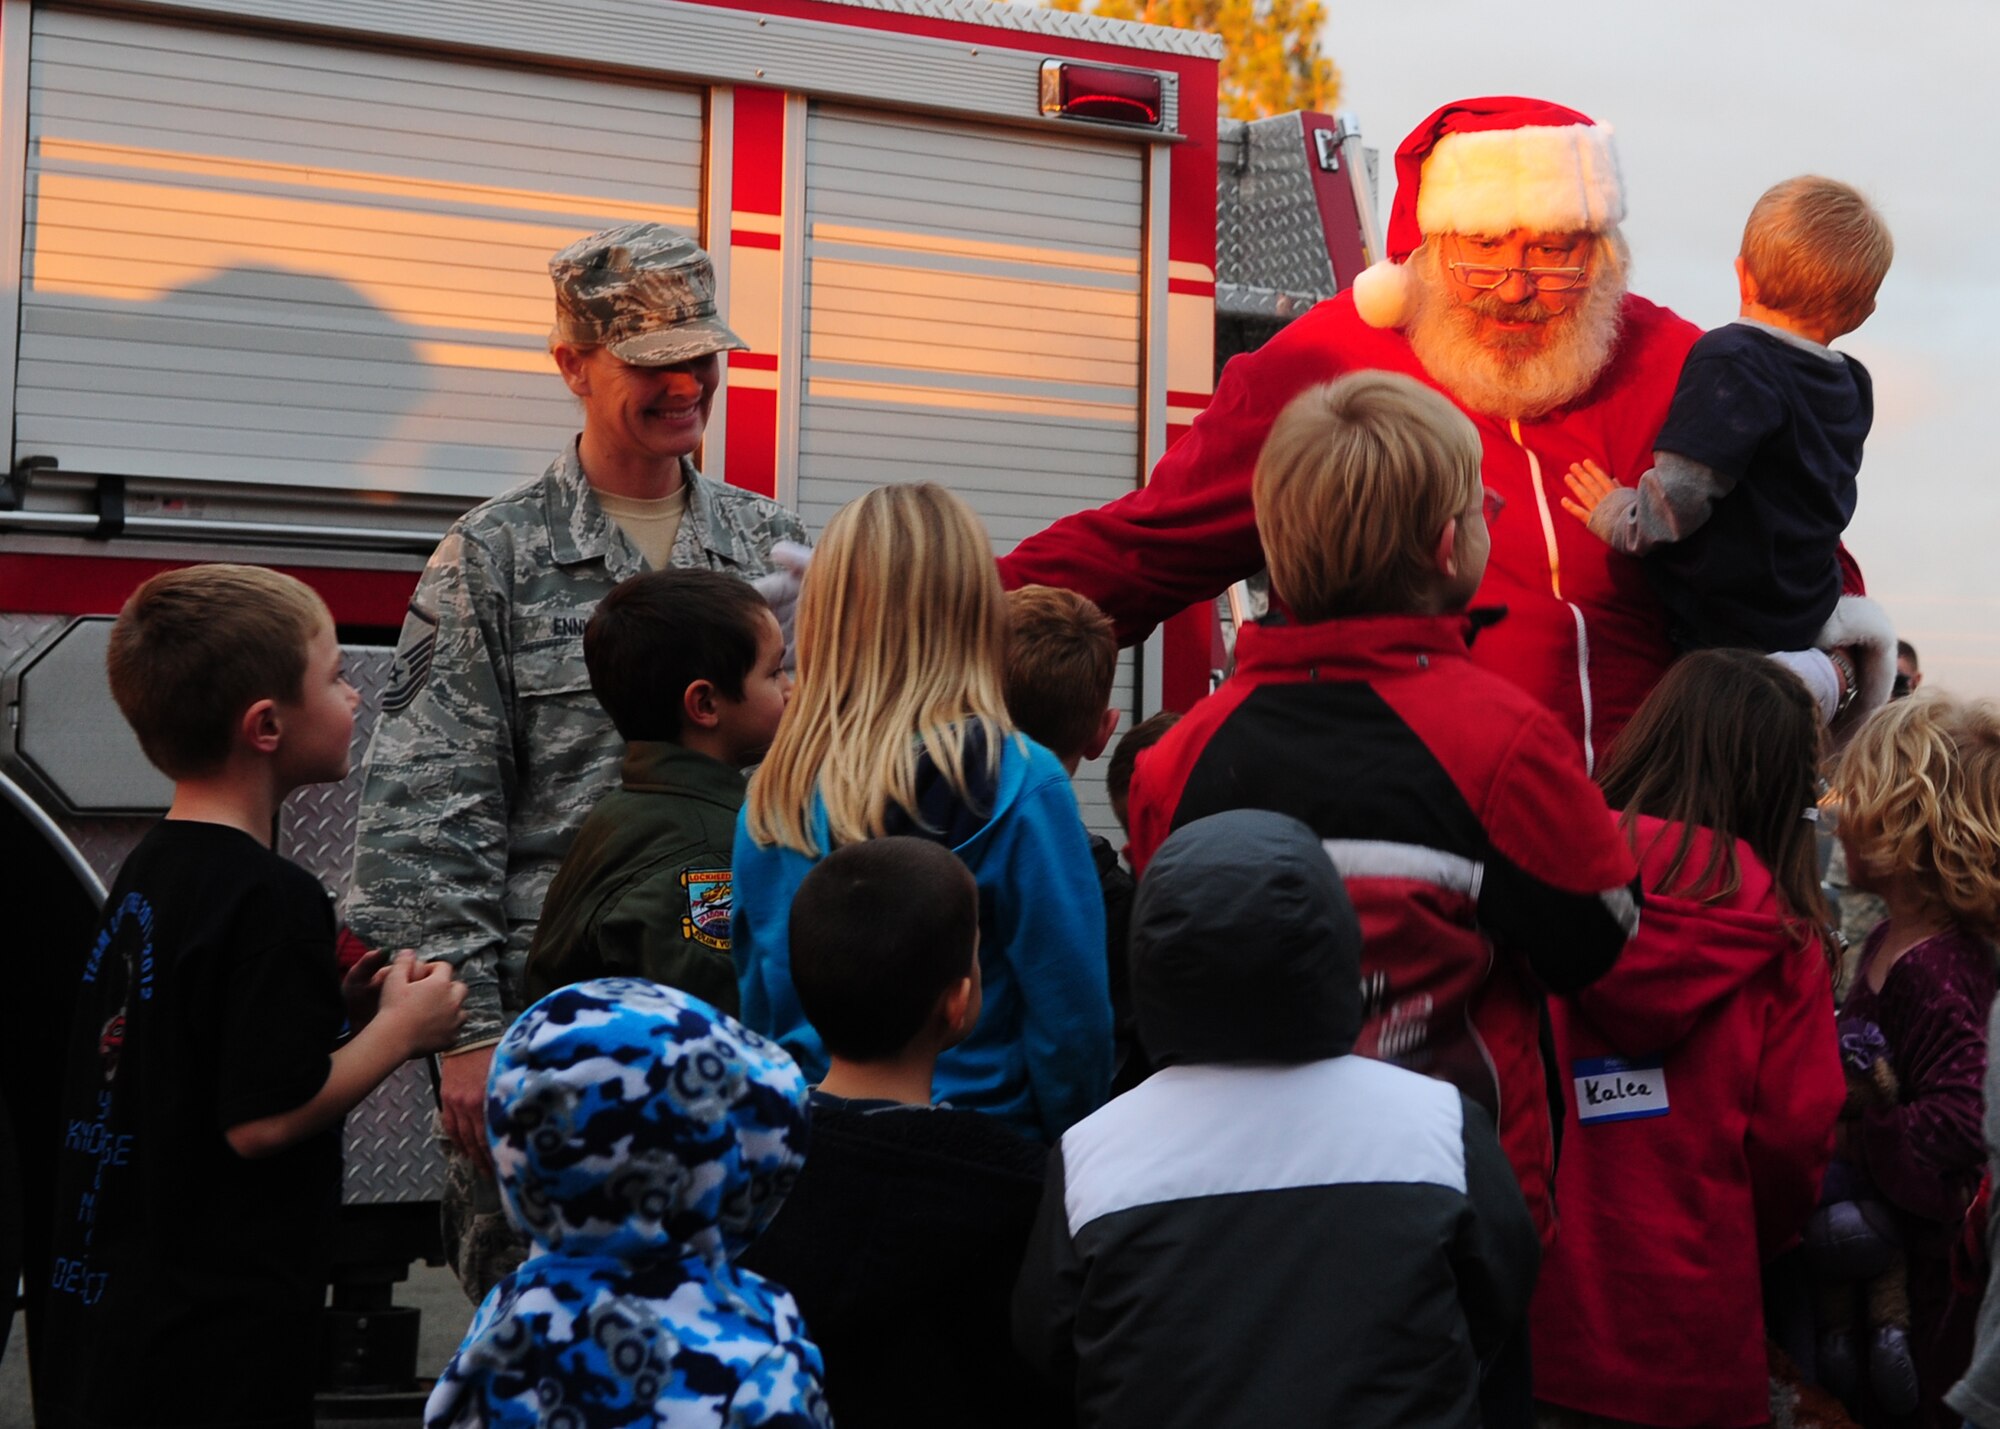 Santa Claus is greeted by children from Beale Air Force Base, Calif., after he arrived on a fire engine to the Hearts Apart Dinner and tree lighting Dec. 7, 2012. The 9th Civil Engineer and 9th Force Support squadrons together with Beale’s first sergeants, Blue Star Moms, and volunteers from the base hosted the tree lighting for the base populace and the Hearts Apart Dinner for spouses and families of deployed Airmen. (U.S. Air Force photo by Senior Airman Shawn Nickel/Released)